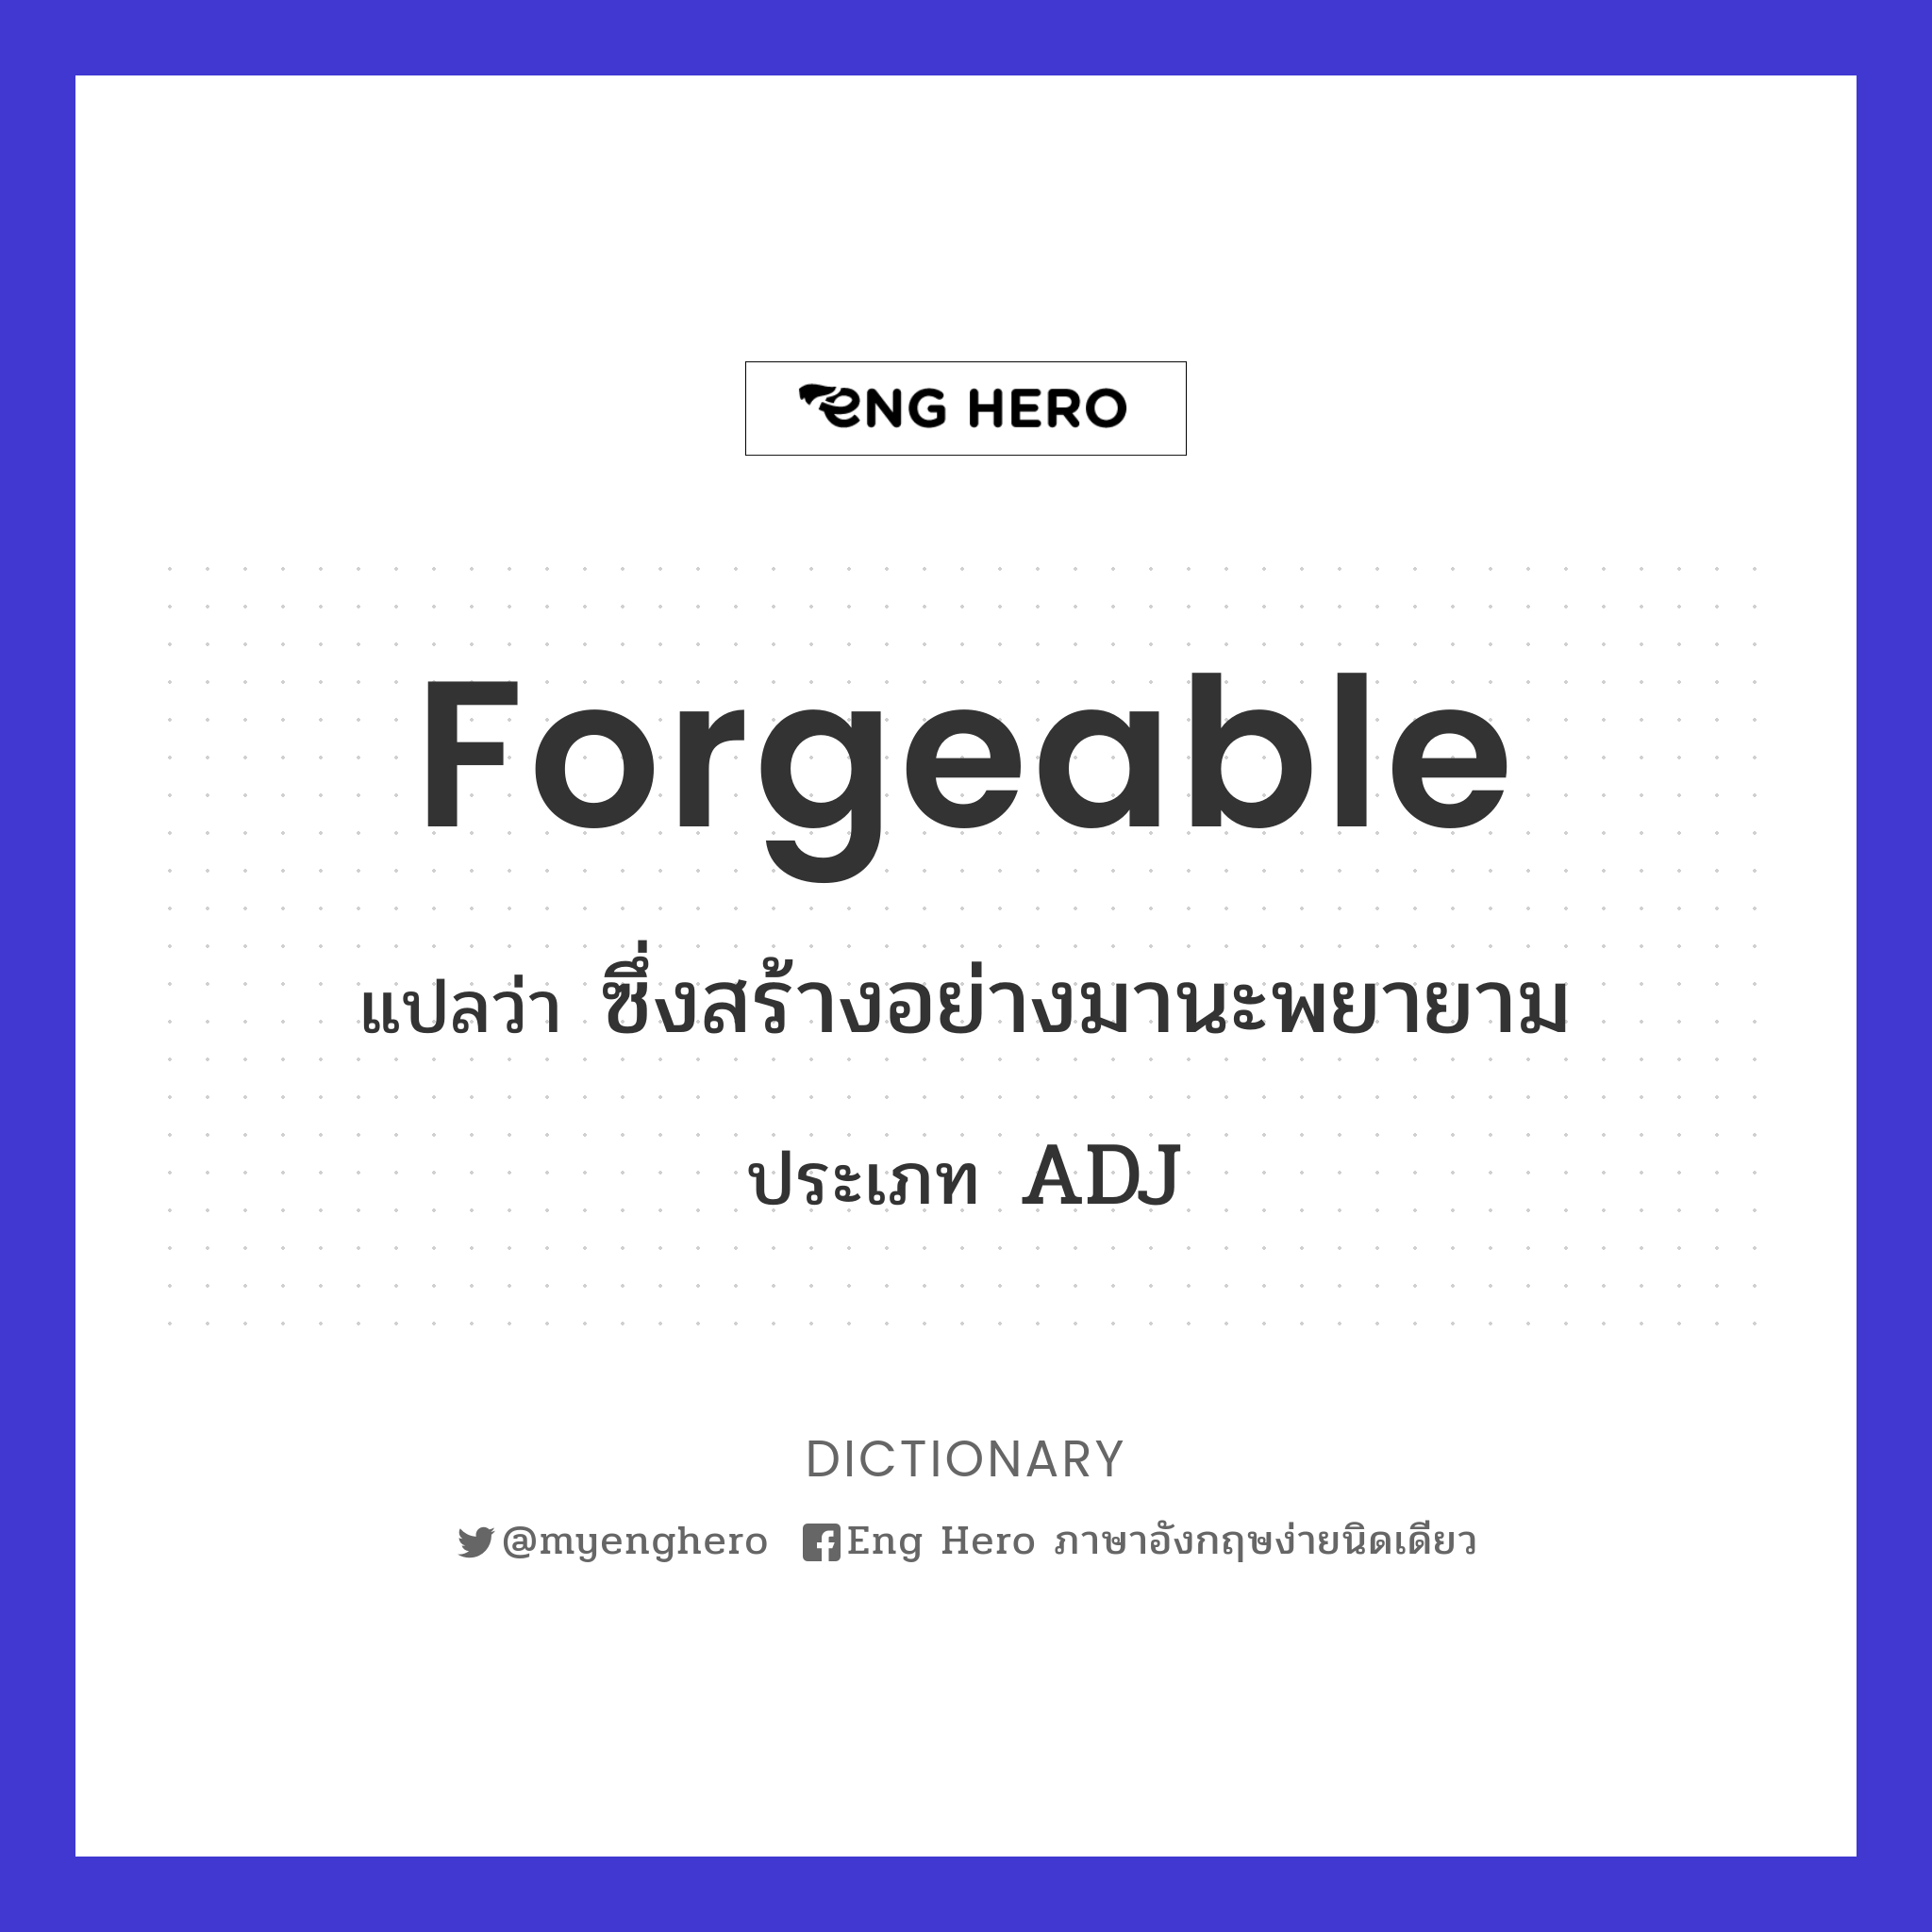 forgeable